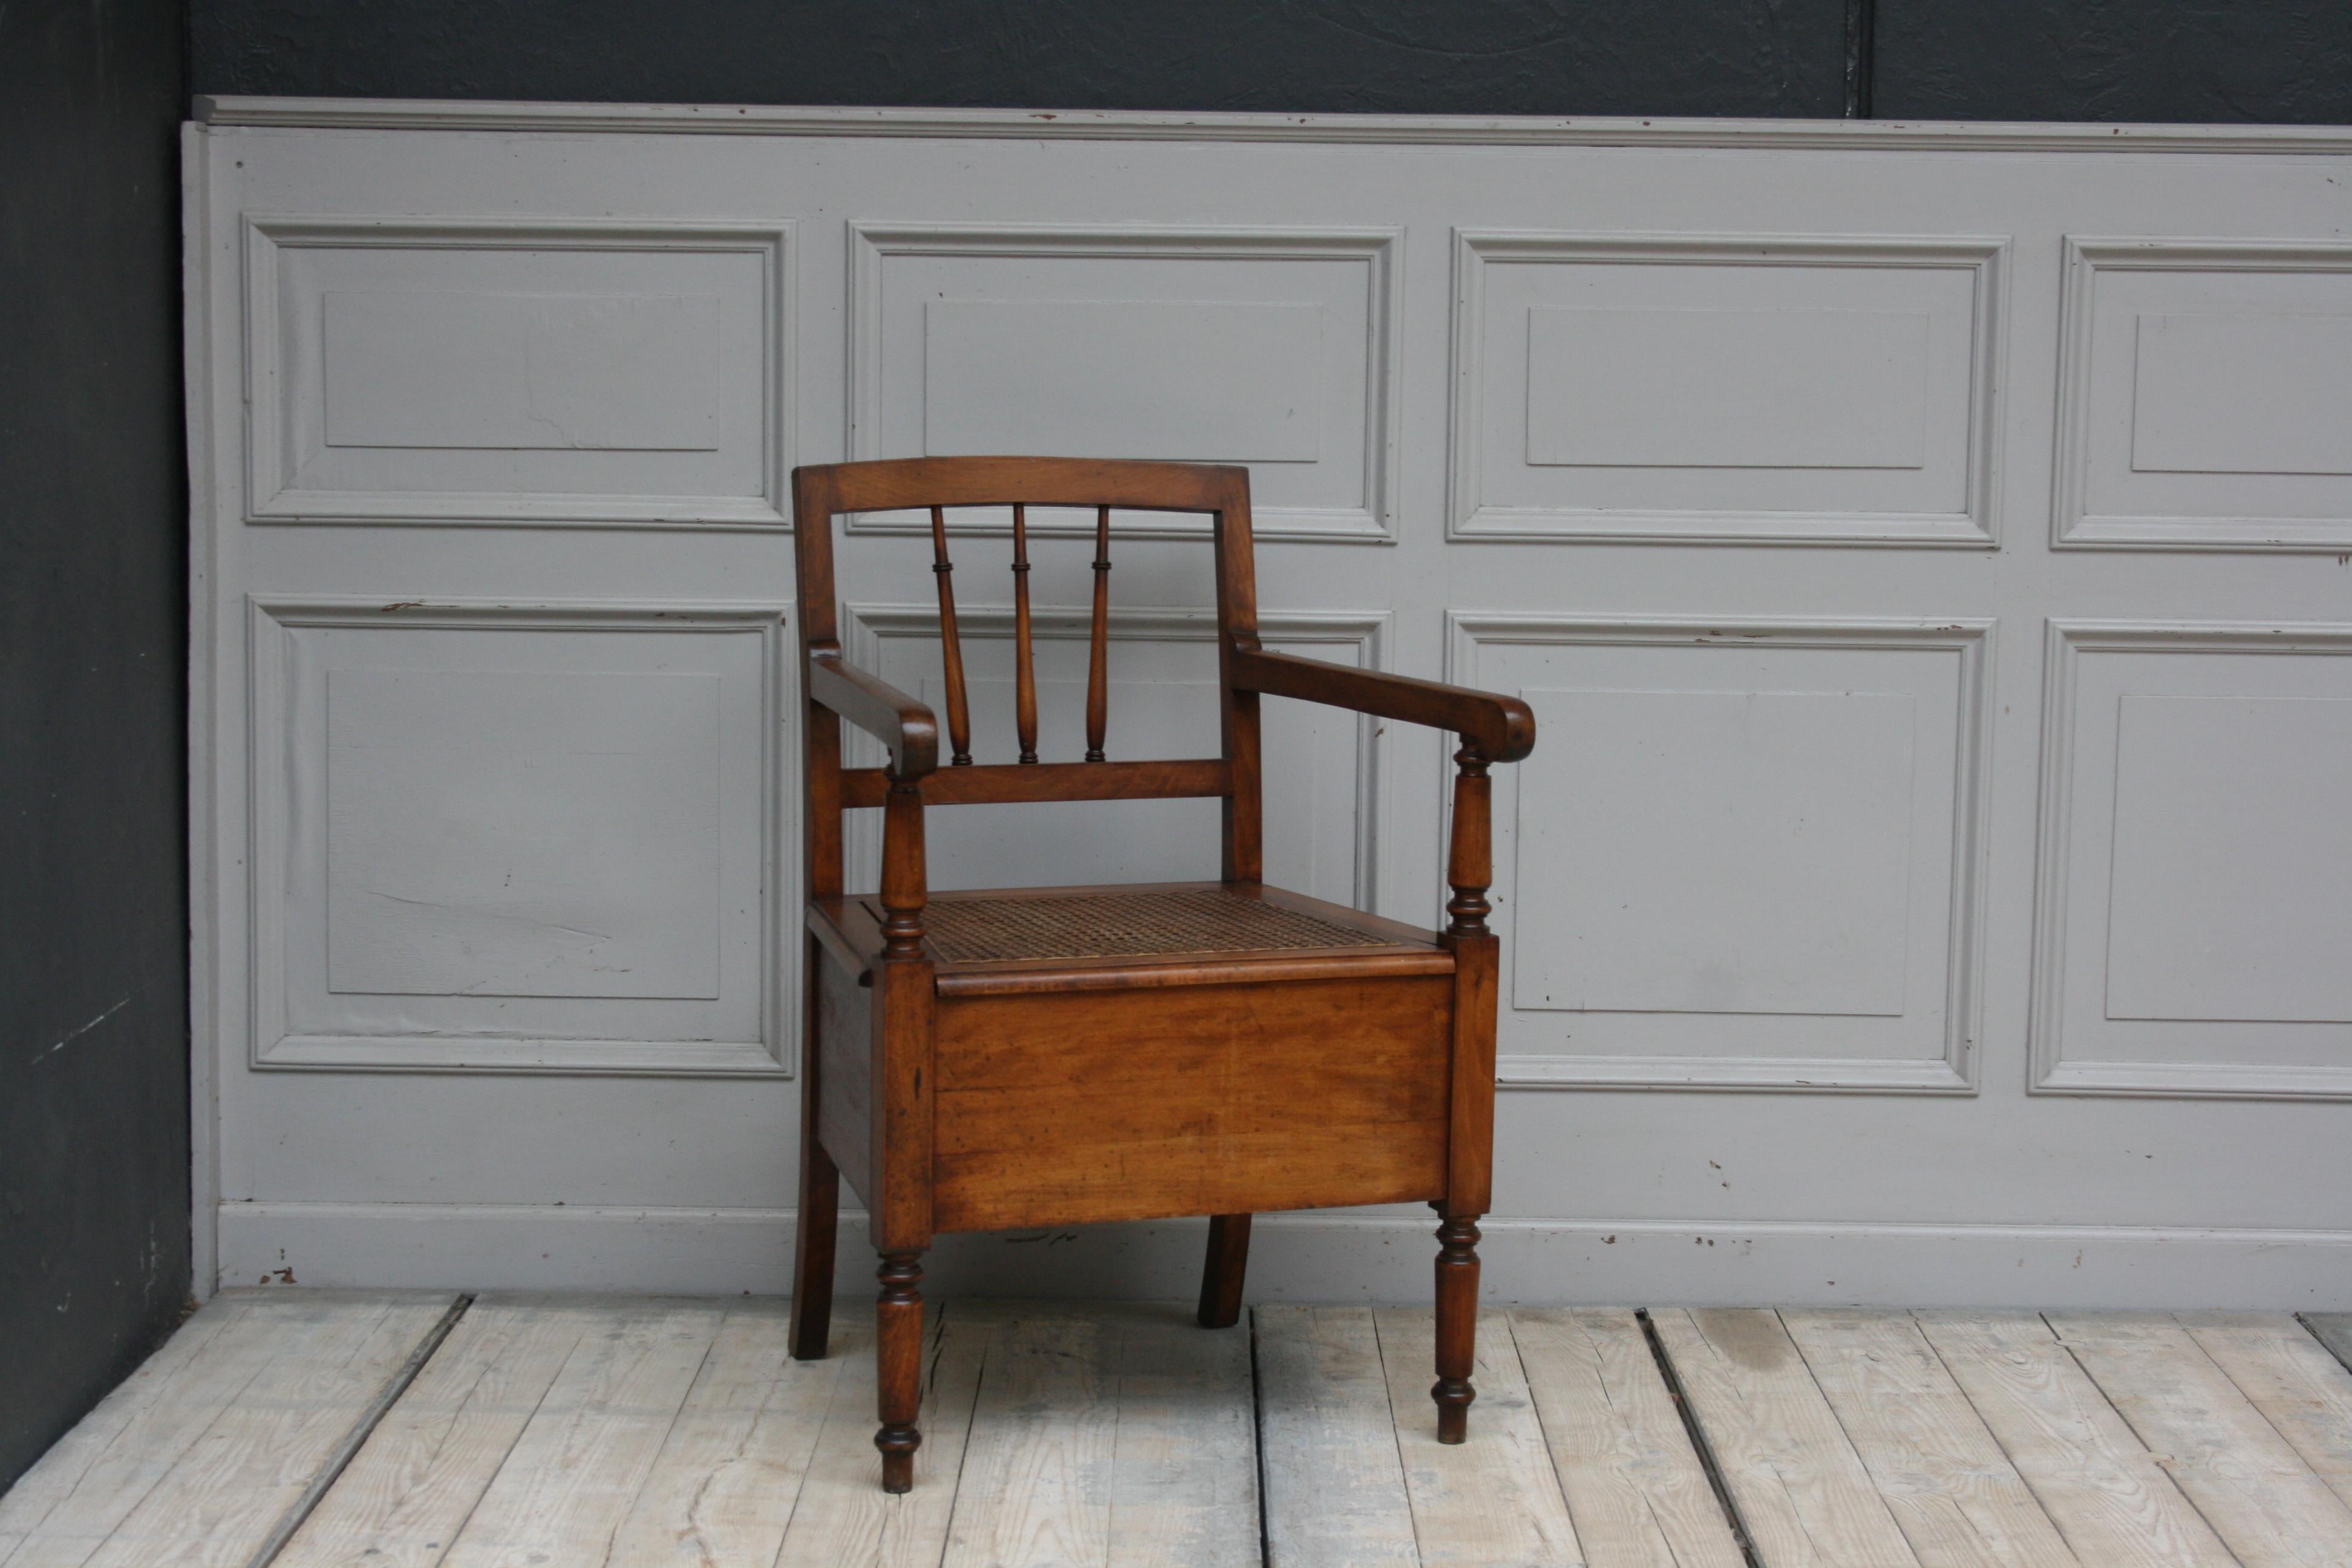 Antique 19th century French armchair that originally served as a potty chair. The seat is covered with 